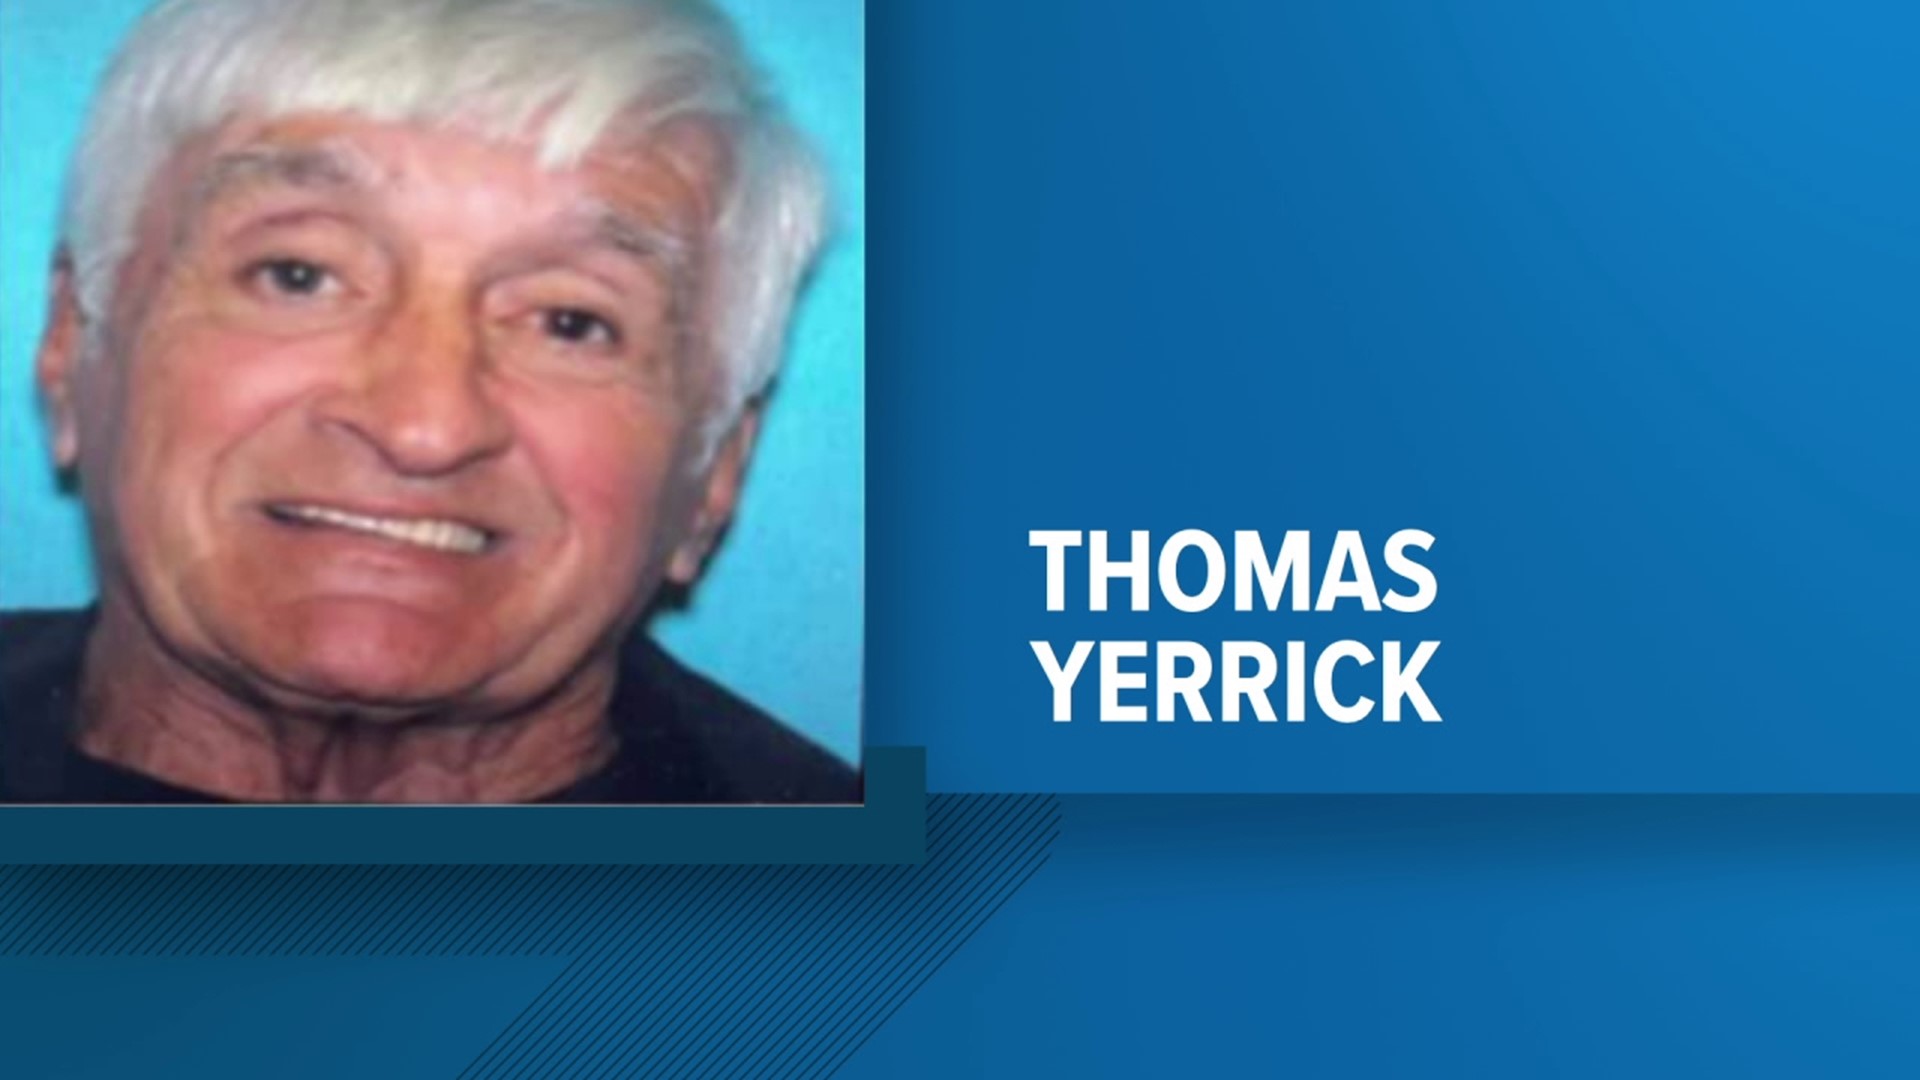 Police are searching for missing 70-year-old Thomas Yerrick of Scranton.